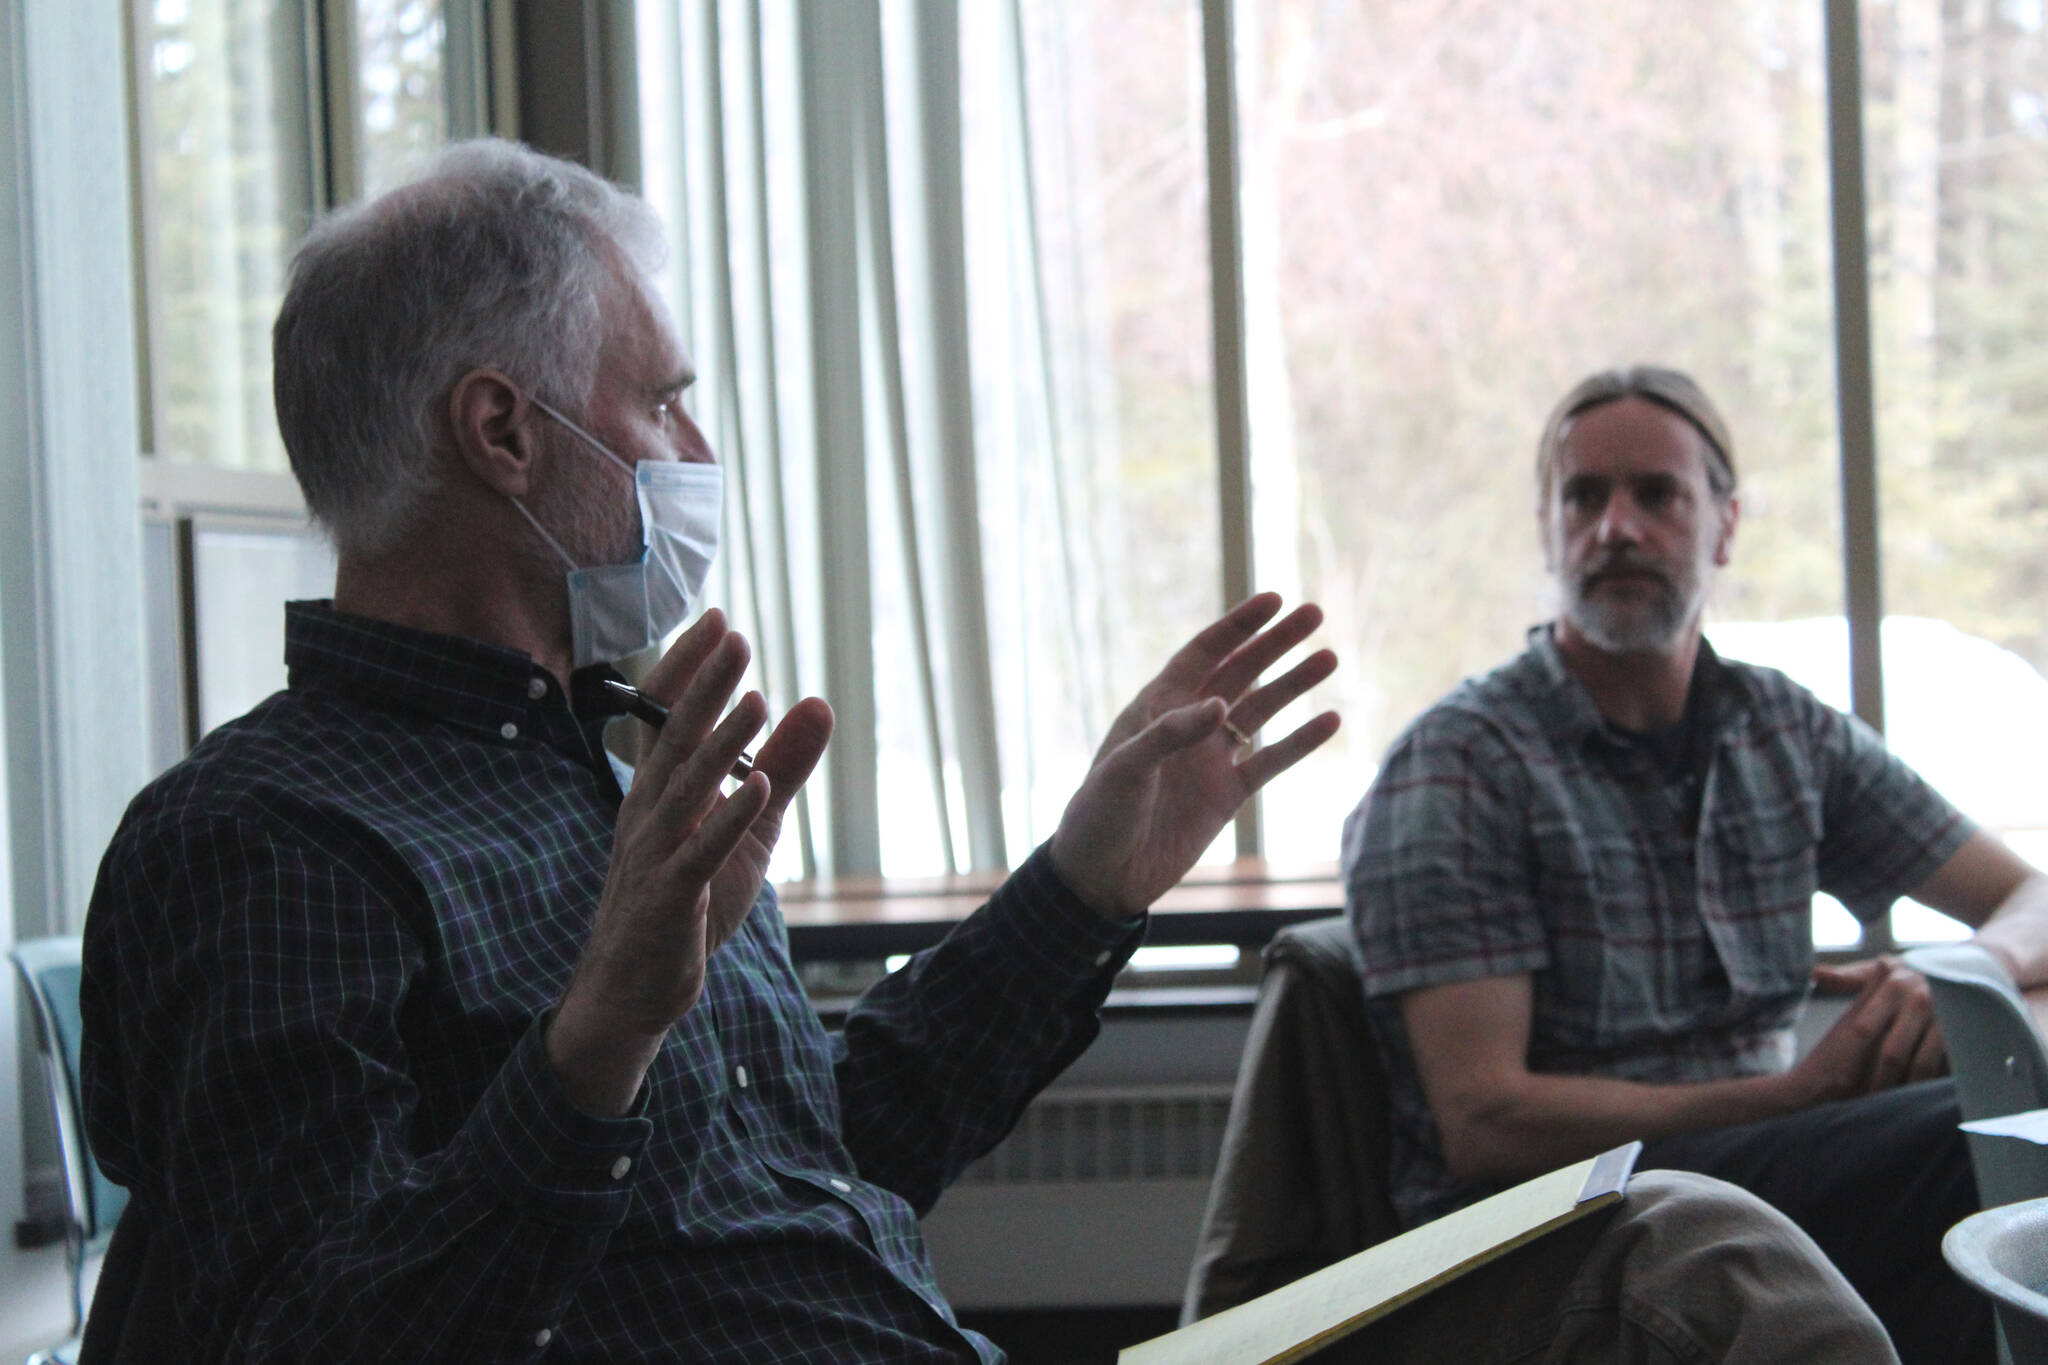 Cooper Landing resident Theo Lexmond (left) speaks during a public engagement event while Kenai Peninsula Borough Land Management Officer Marcus Mueller looks on at the Donald E. Gilman Kenai River Center on Tuesday, March 22, 2022 in Soldotna, Alaska. (Ashlyn O’Hara/Peninsula Clarion)